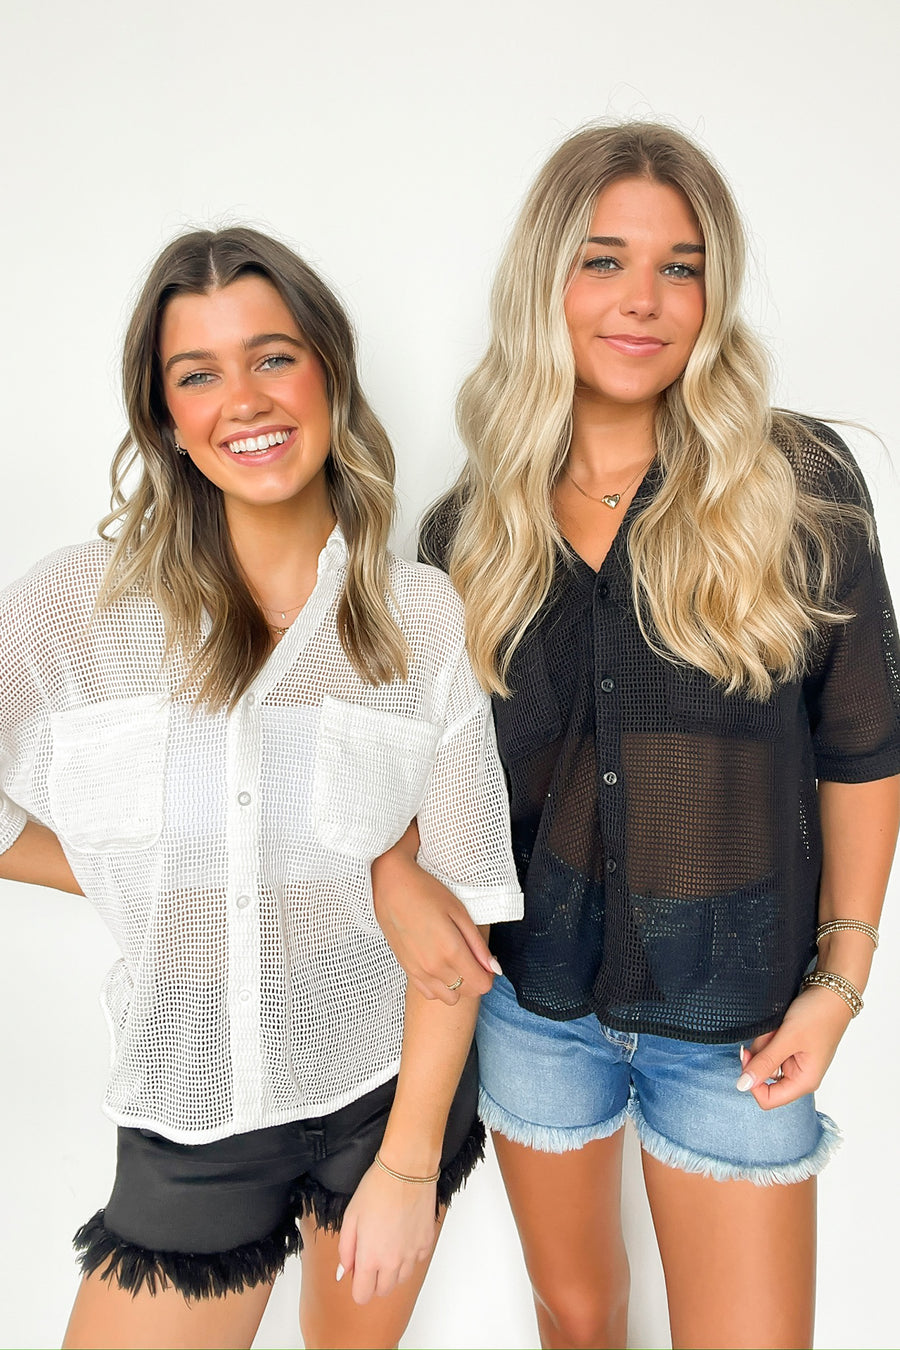  Dennington Short Sleeve Open Knit Button Down Top - Madison and Mallory